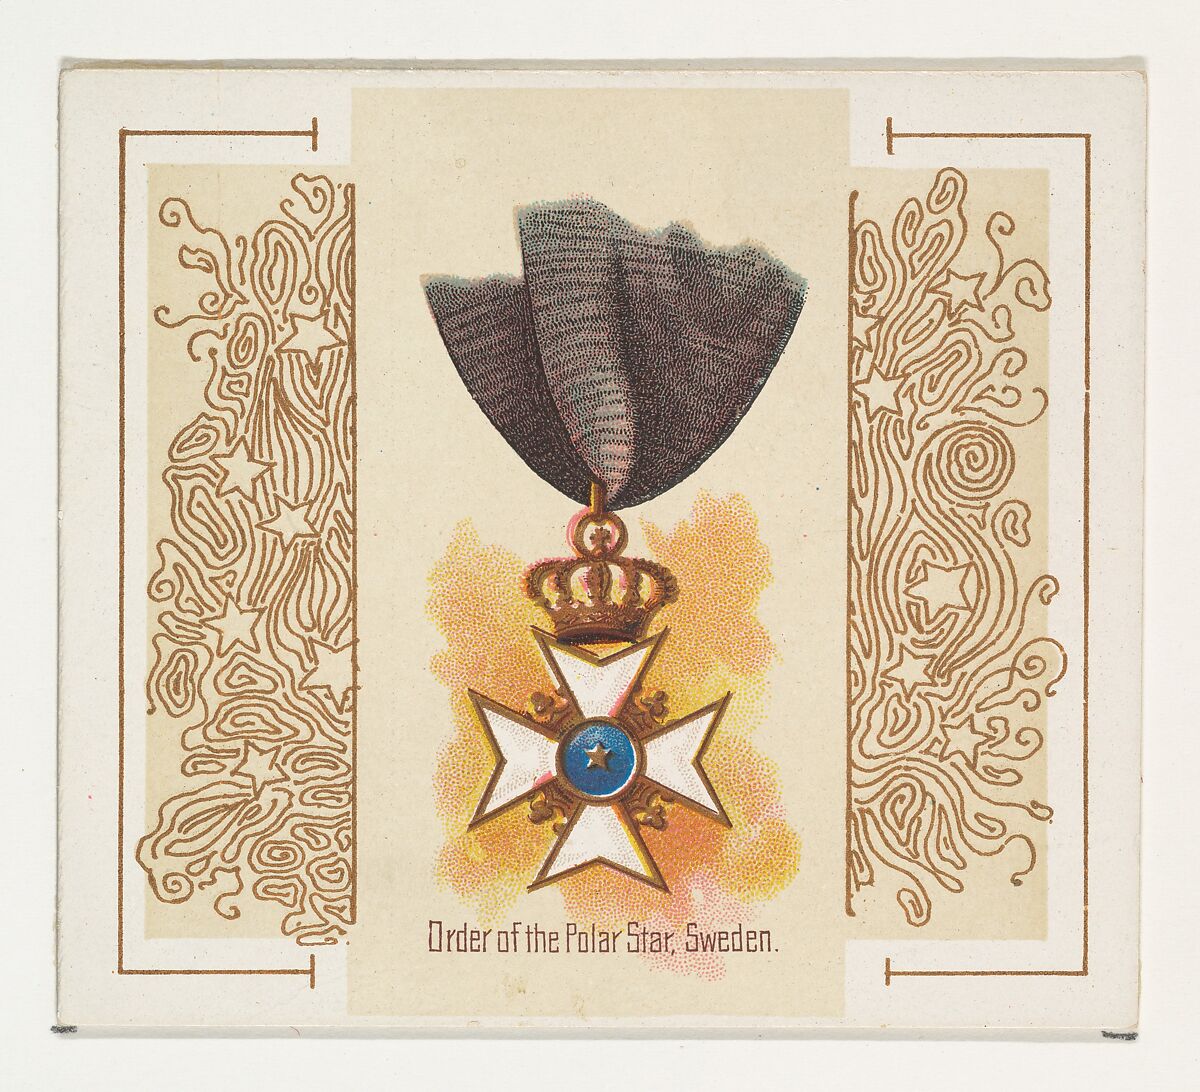 Order of the Polar Star, Sweden, from the World's Decorations series (N44) for Allen & Ginter Cigarettes, Issued by Allen &amp; Ginter (American, Richmond, Virginia), Commercial color lithograph 